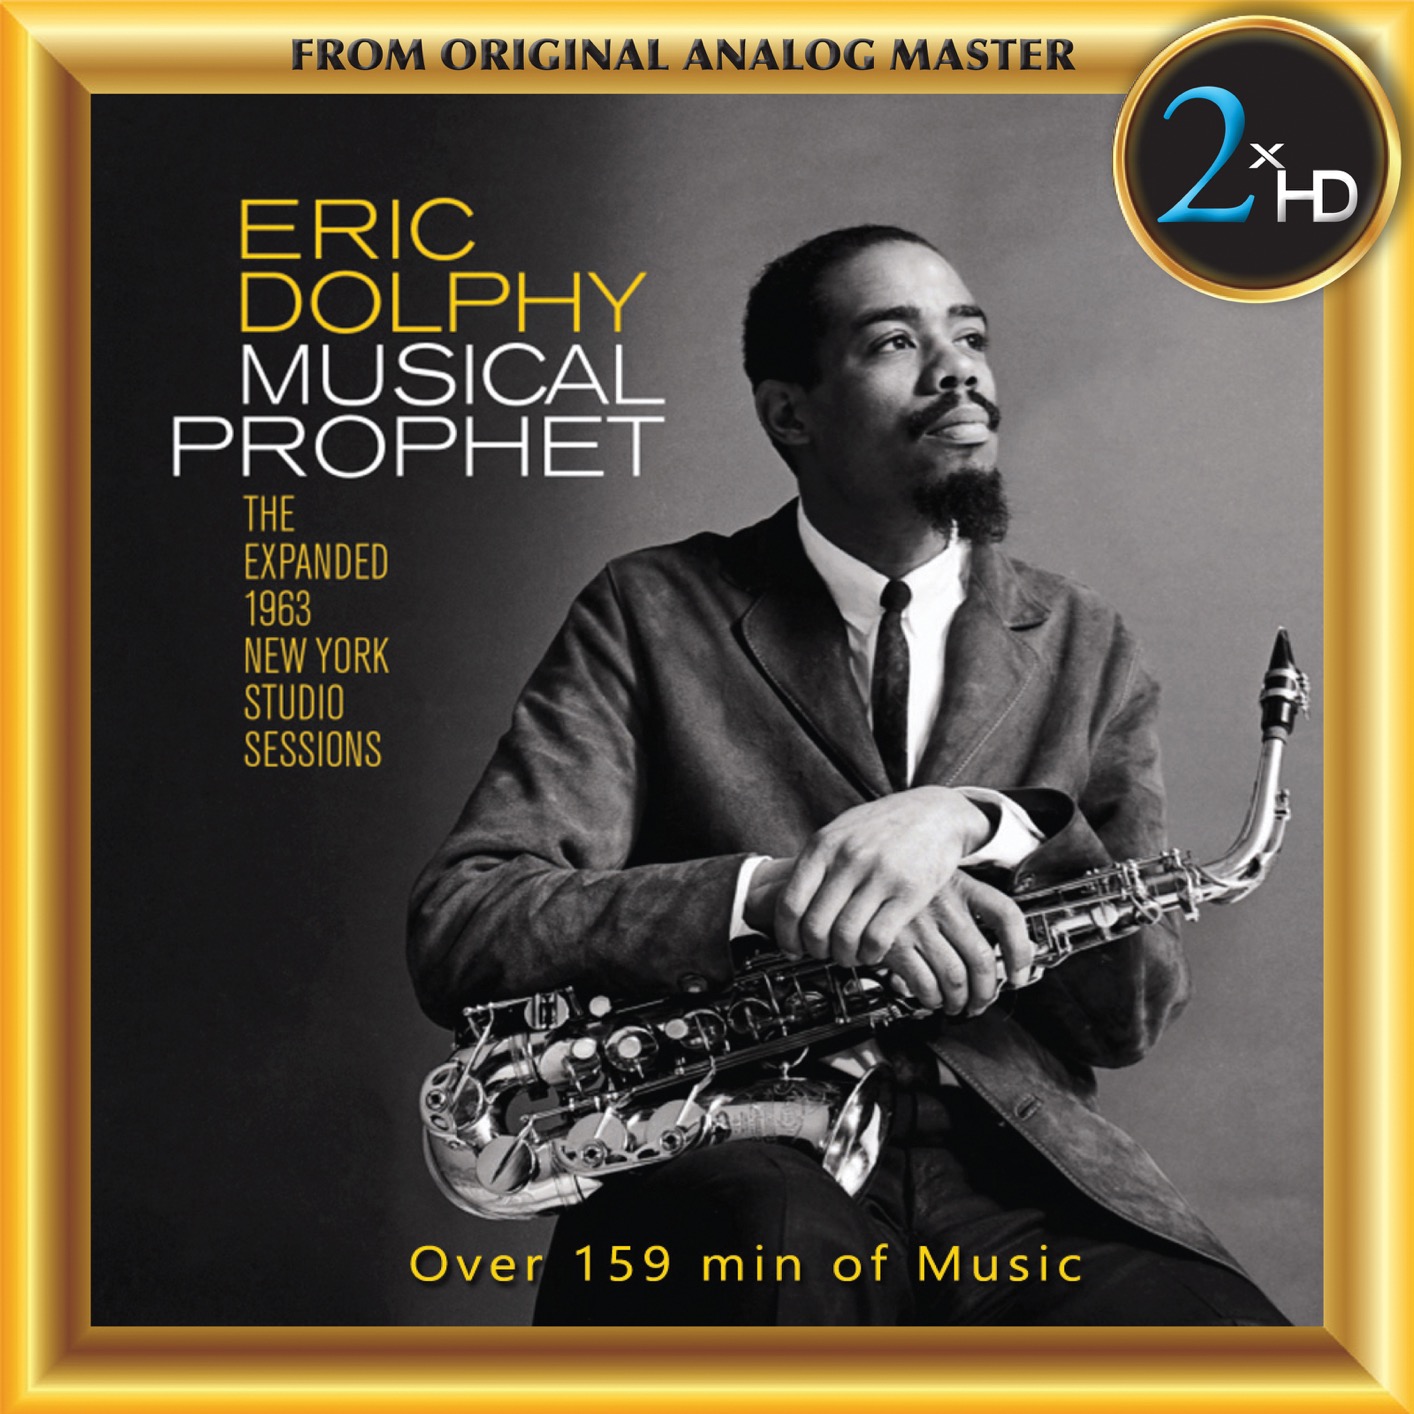 Eric Dolphy - Musical Prophet: The Expanded 1963 New York Studio Sessions (2019) [FLAC 24bit/192kHz]